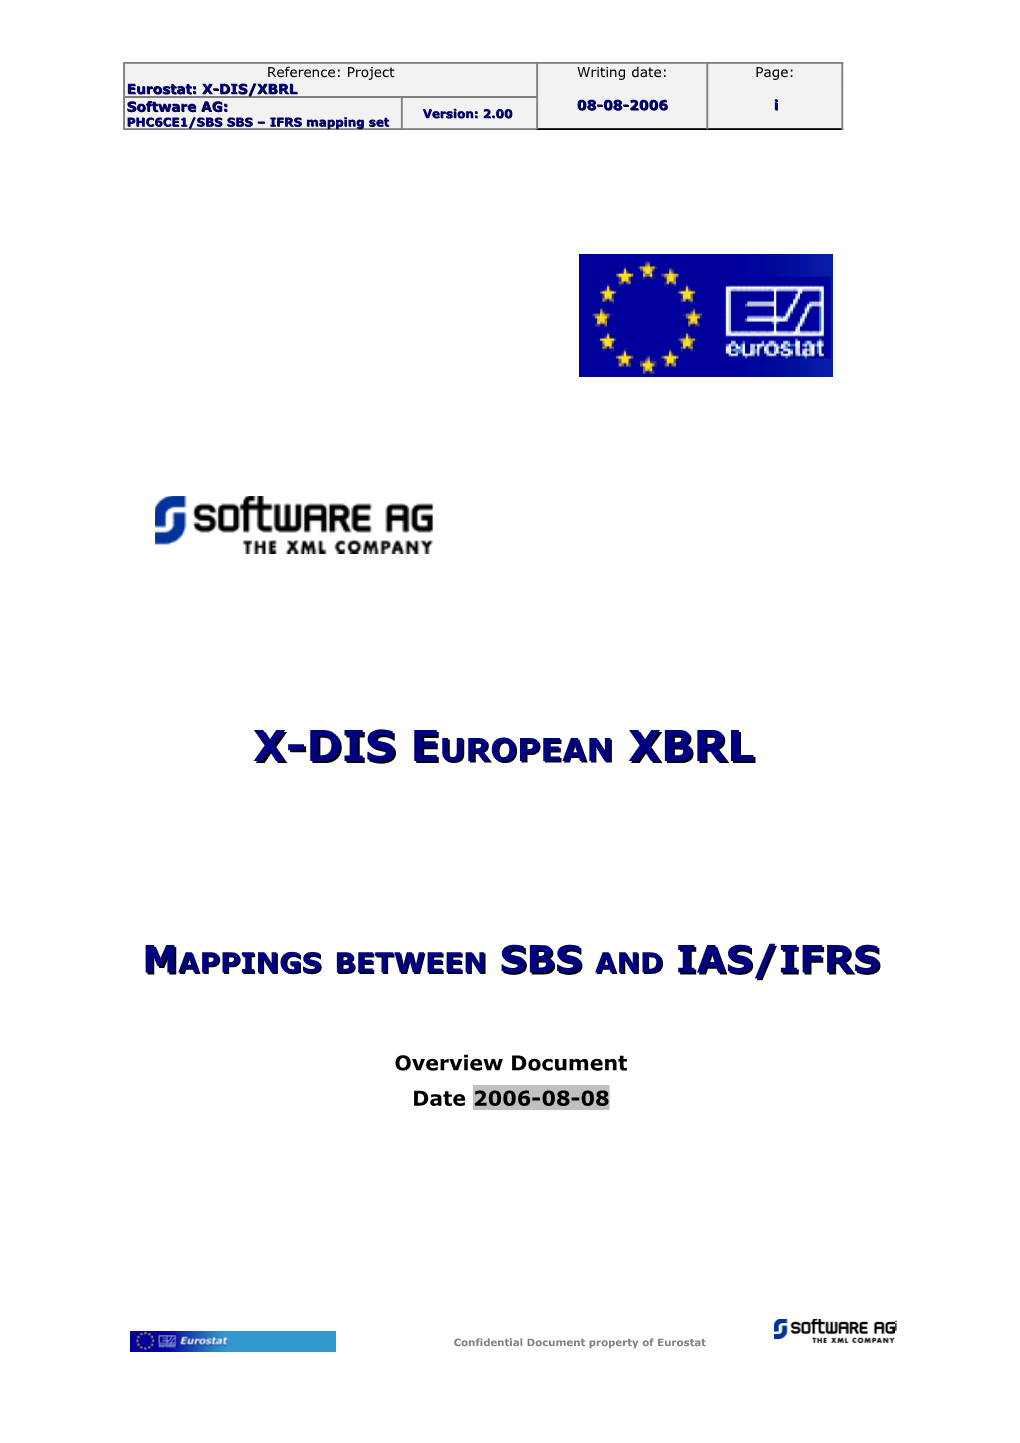 Mappings Between SBS and IAS/IFRS